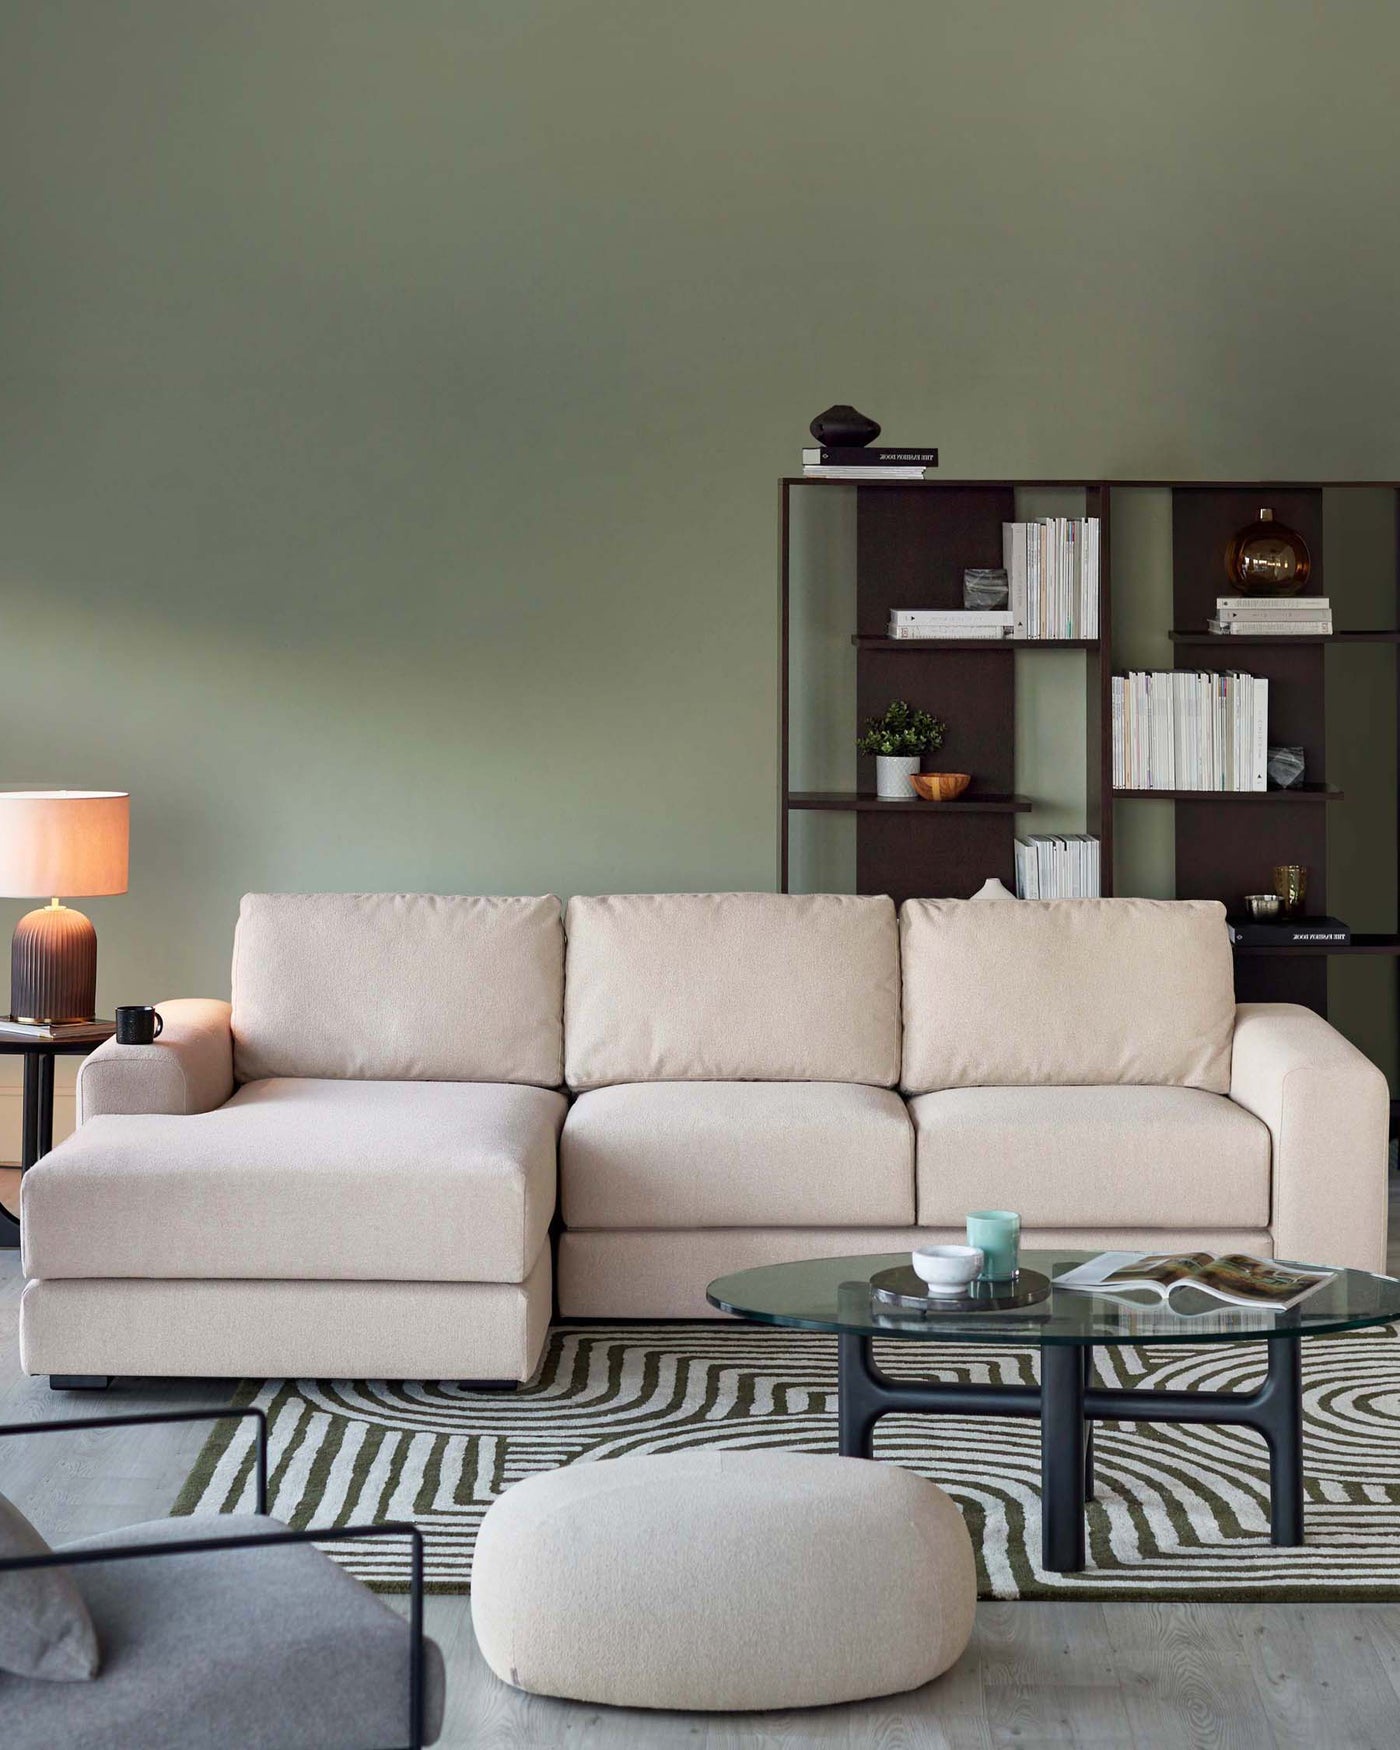 A modern living room setup featuring a light beige L-shaped sectional sofa, a round beige ottoman, a glass coffee table with a black frame, a dark bookshelf filled with white books and decorative items, and a table lamp with a beige shade on a small side table.